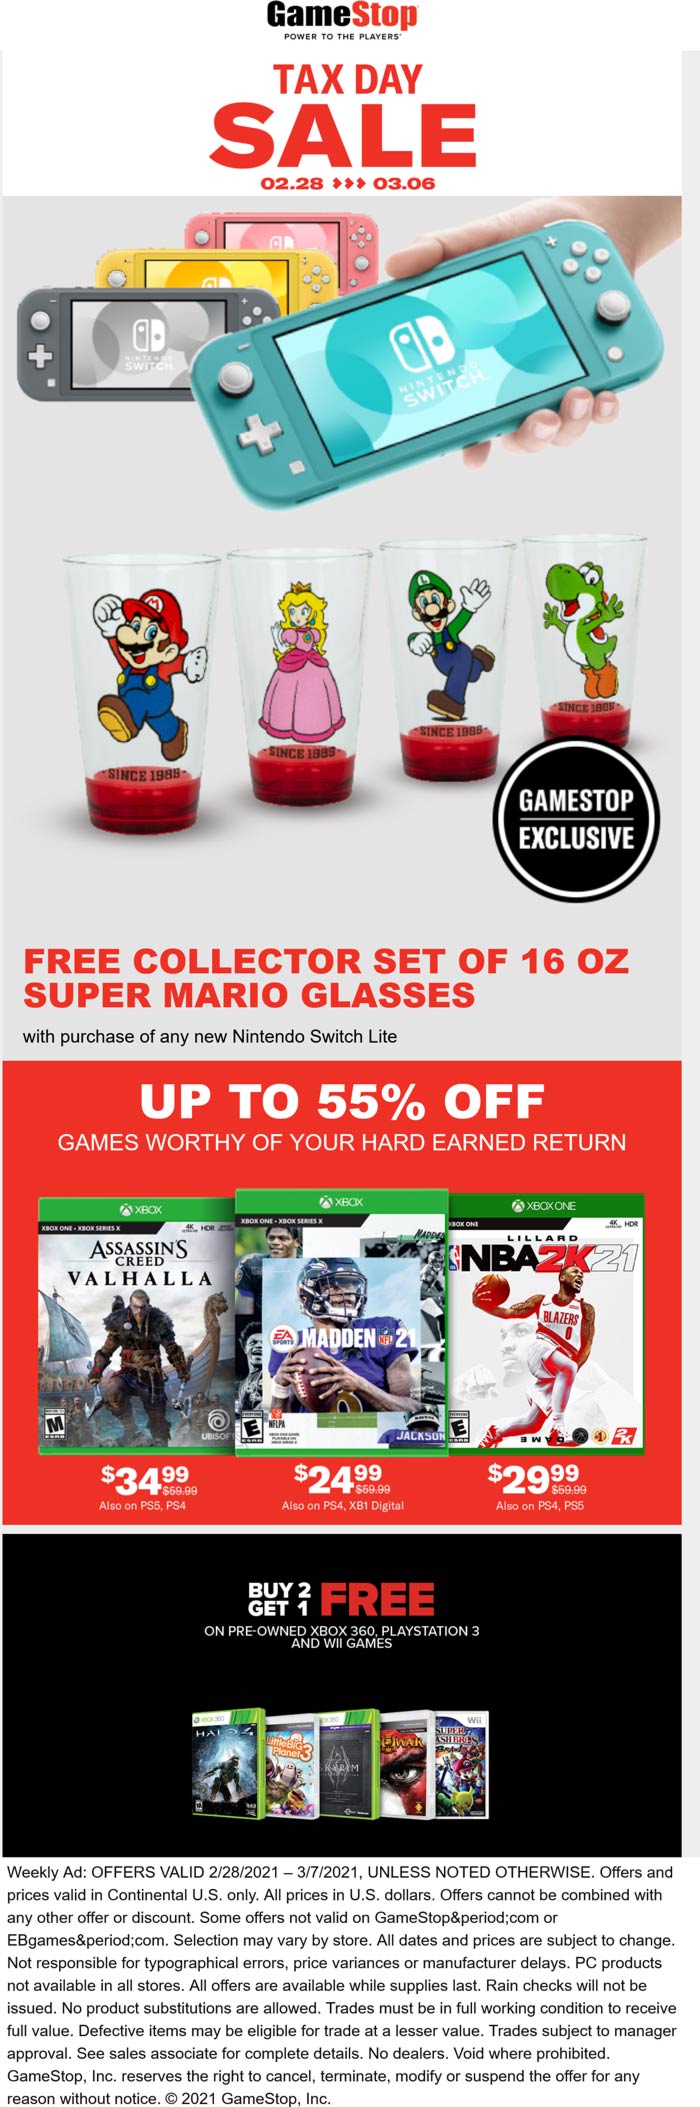 Gamestop stores Coupon  3rd used 360 PS3 & WII game free today at Gamestop #gamestop 